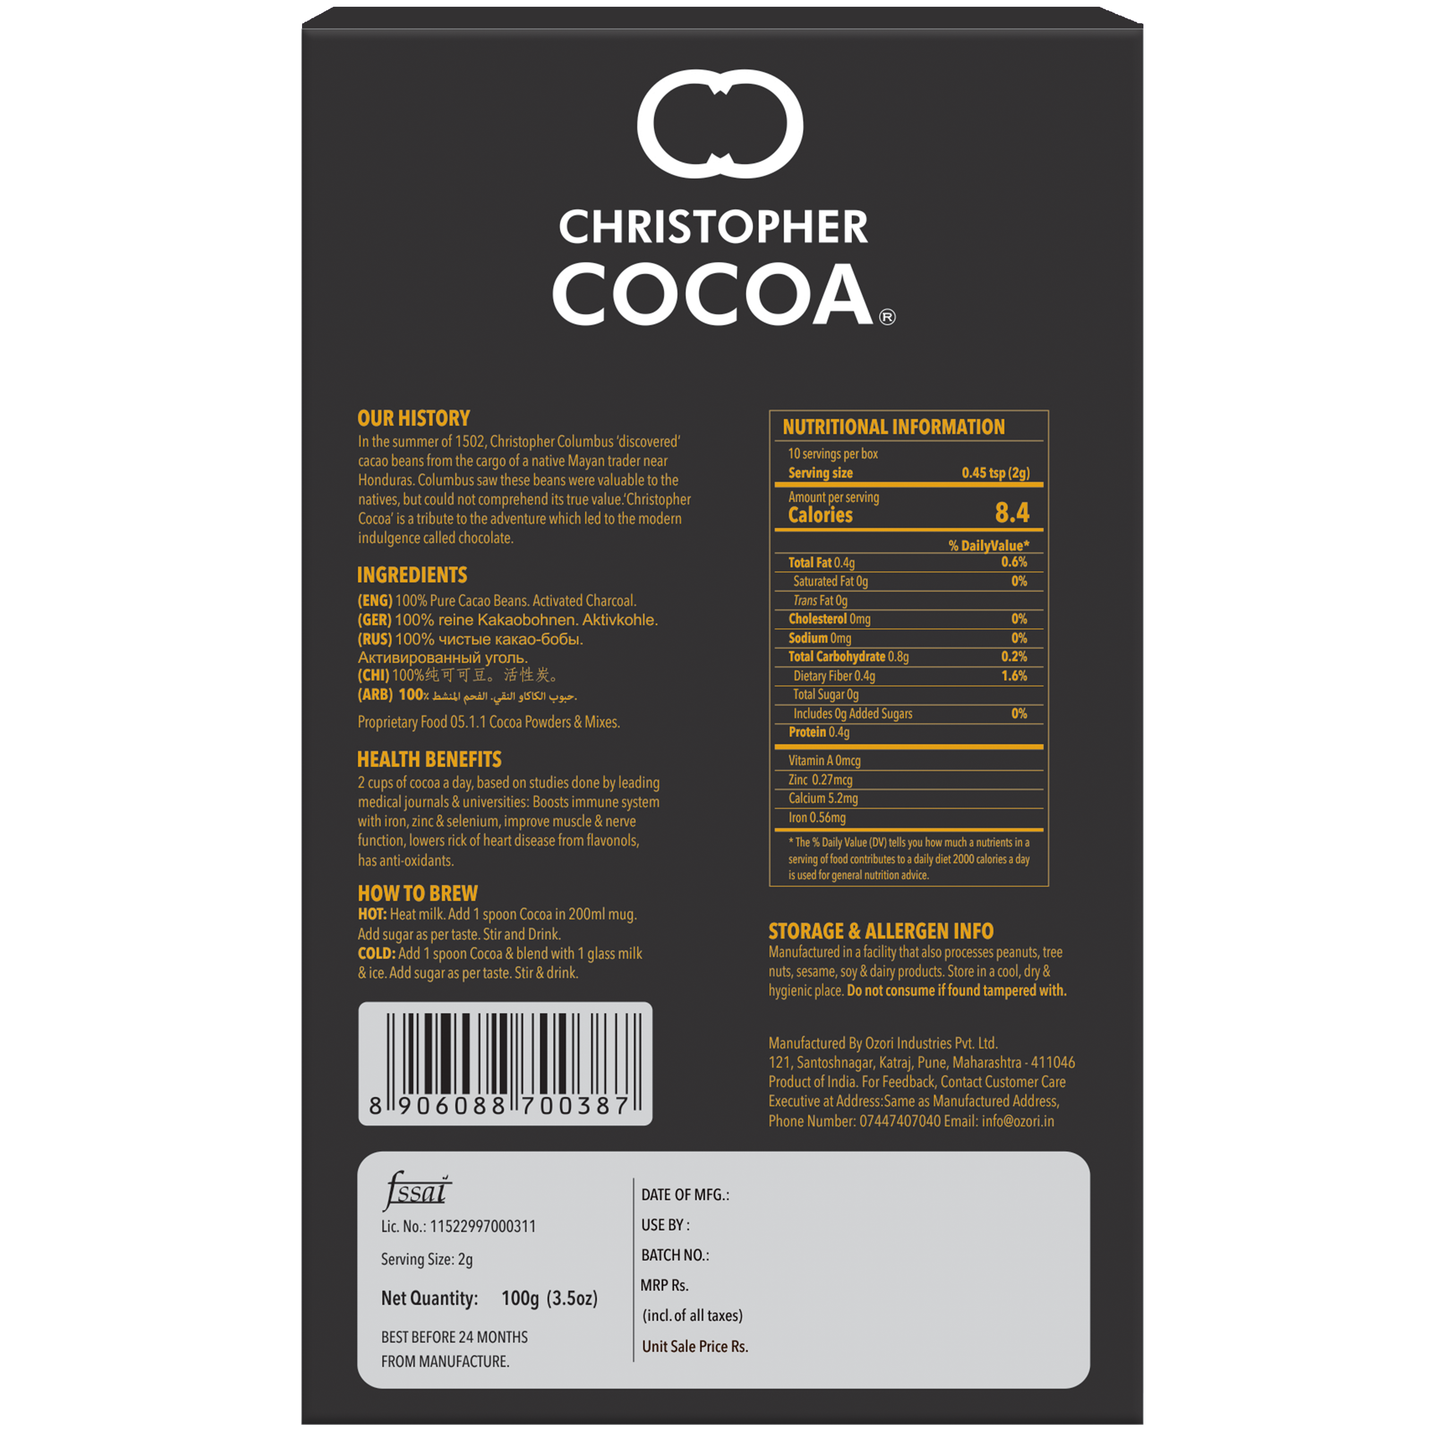 Activated Charcoal Dark Cocoa Powder, Black, Unsweetened, 100g (Bake, Cake, Hot Chocolate, Drinking Shakes) 